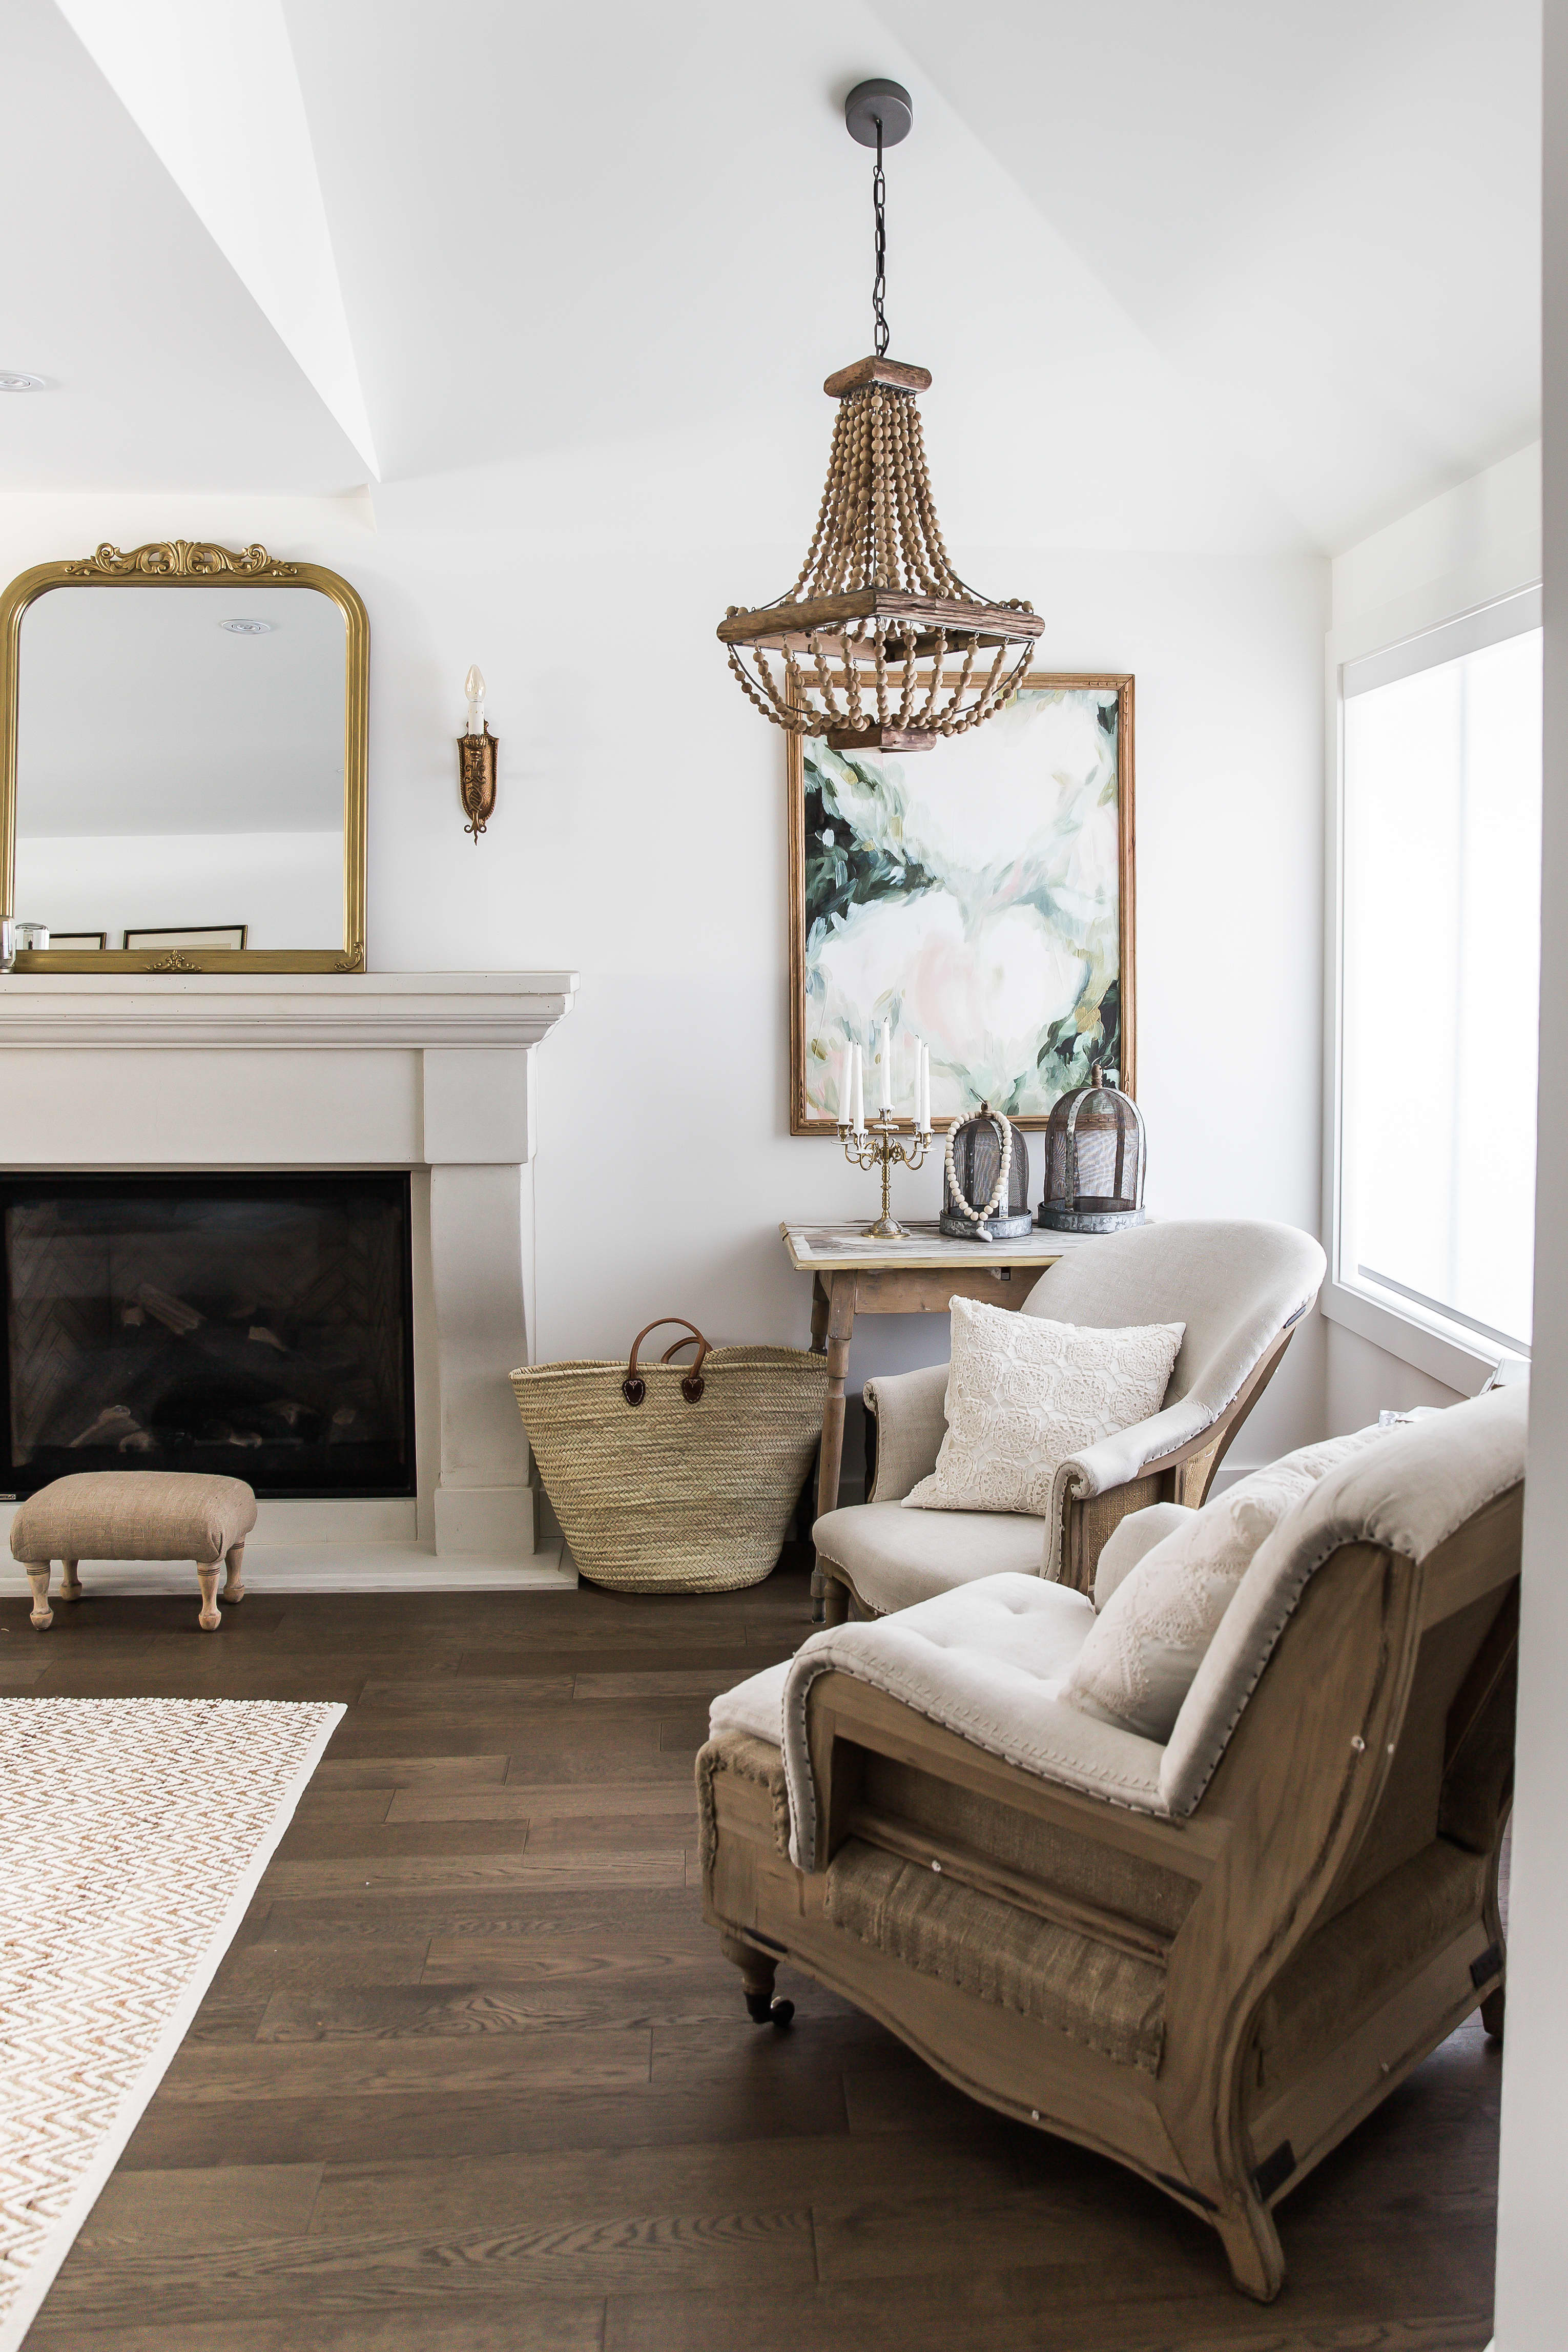 House Tour: A Simple & Chic 